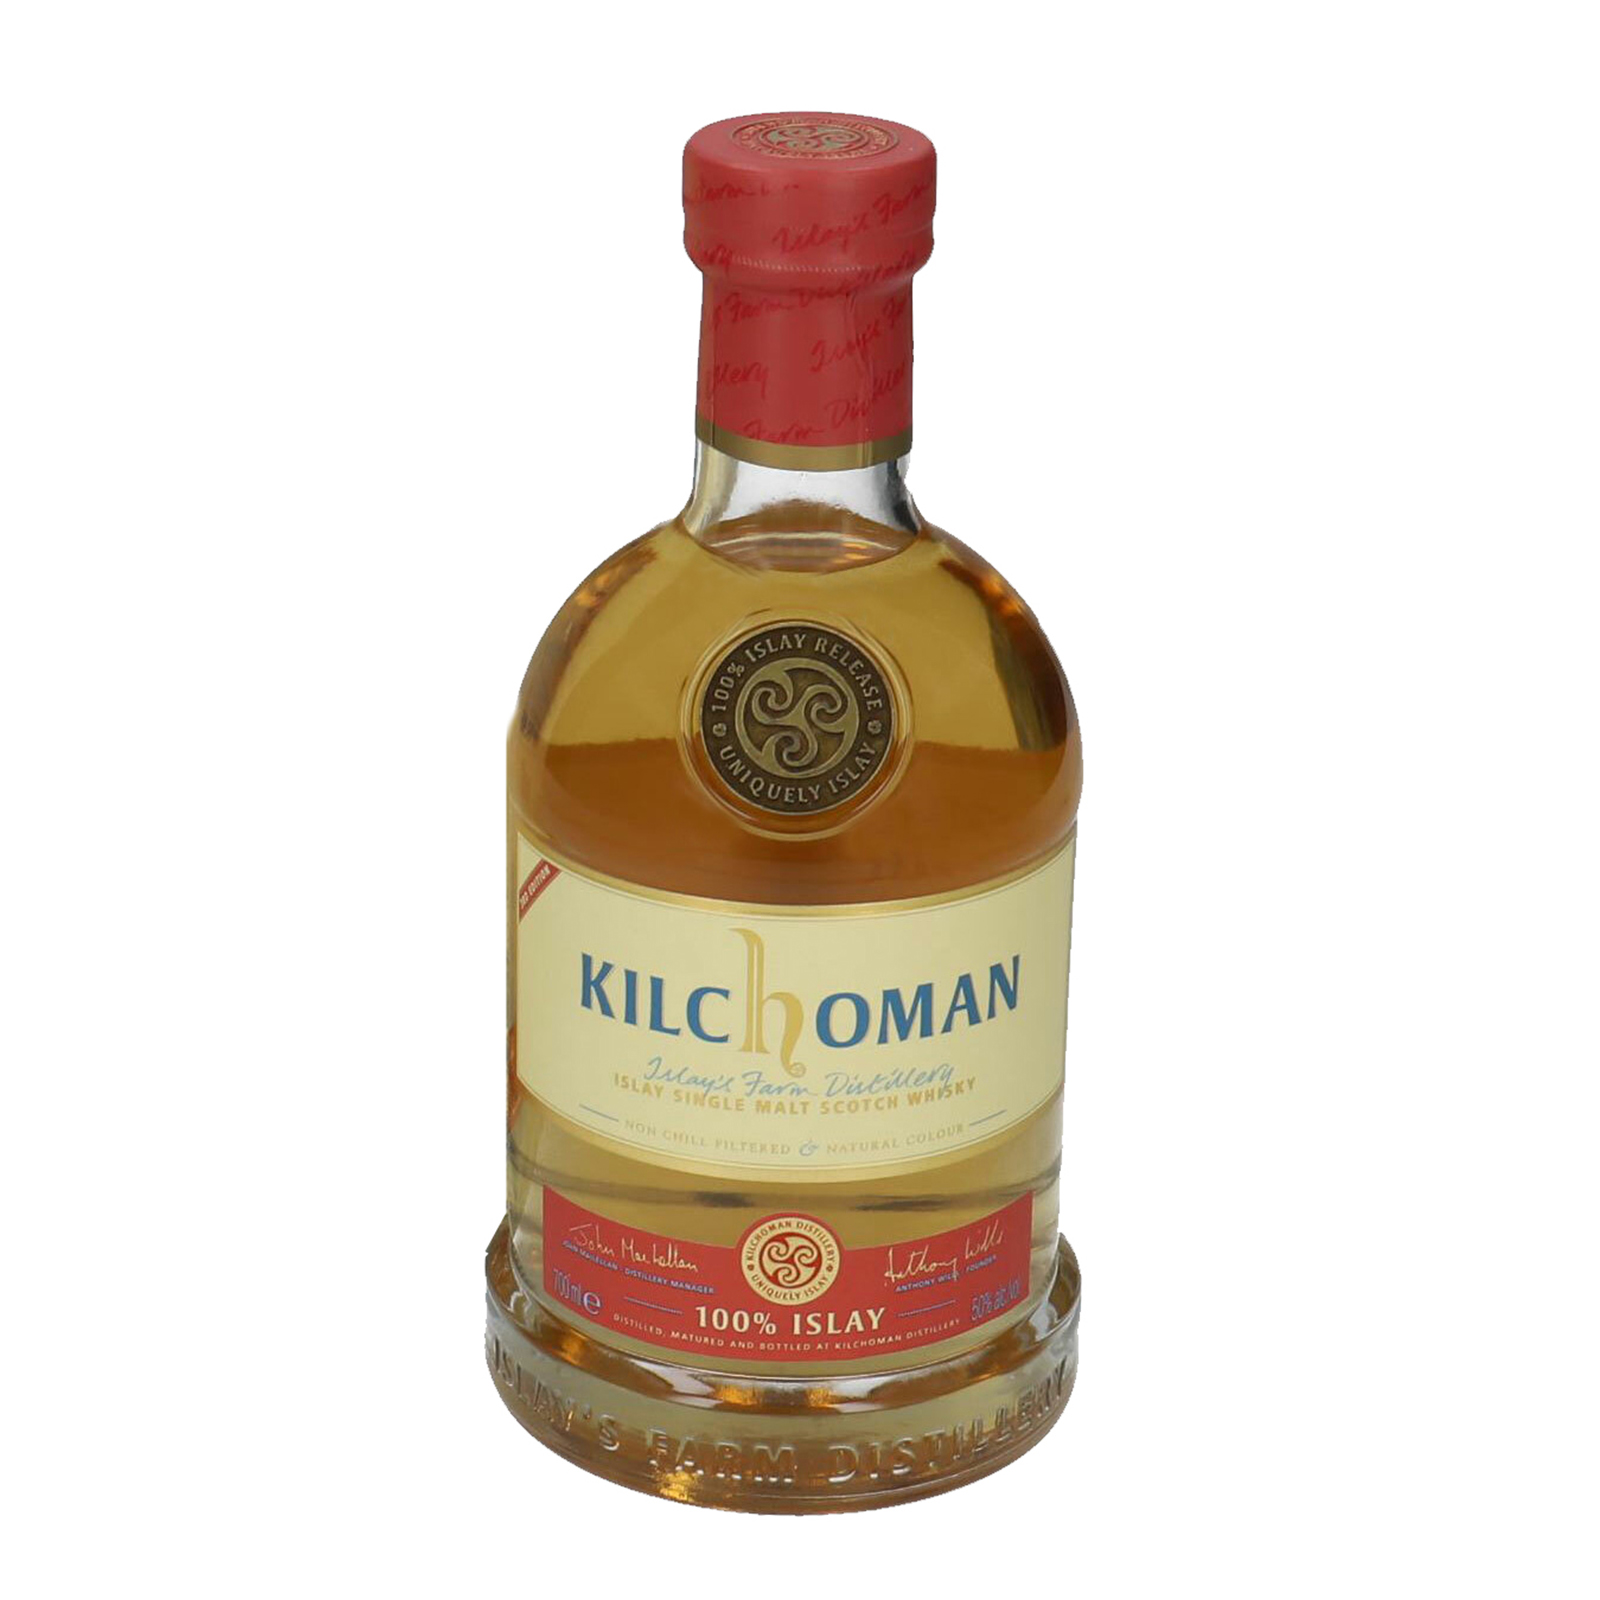 You are currently viewing Kilchoman 100% Islay – 3rd Edition